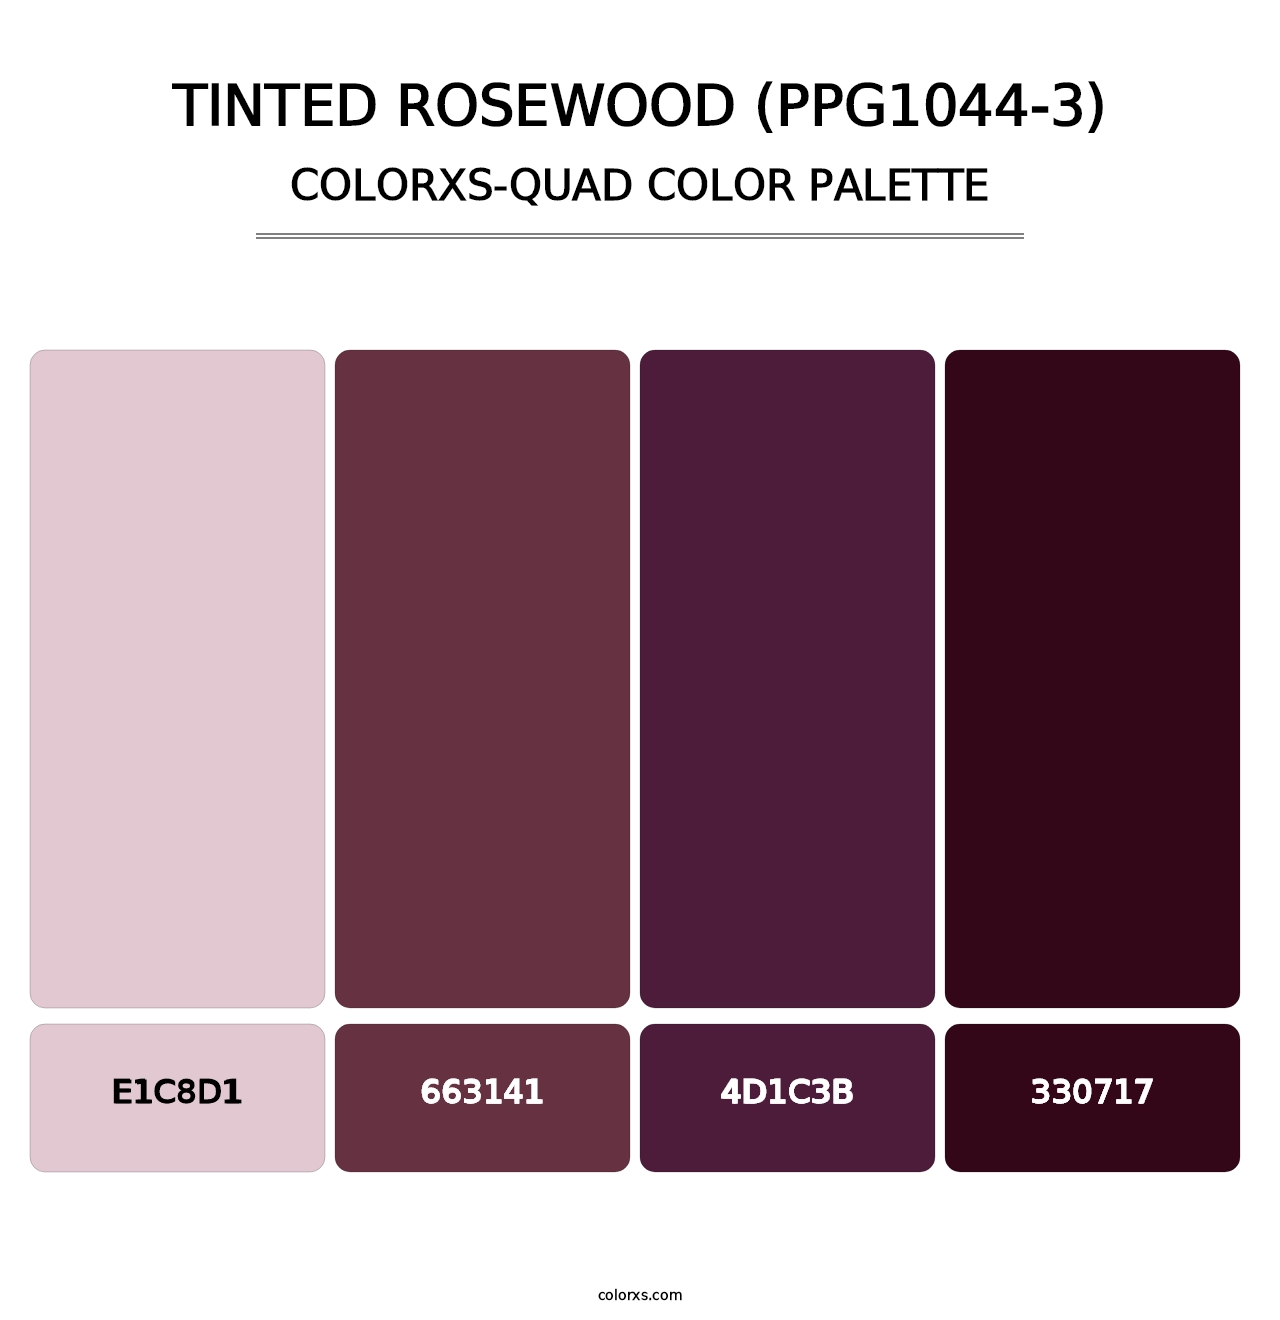 Tinted Rosewood (PPG1044-3) - Colorxs Quad Palette